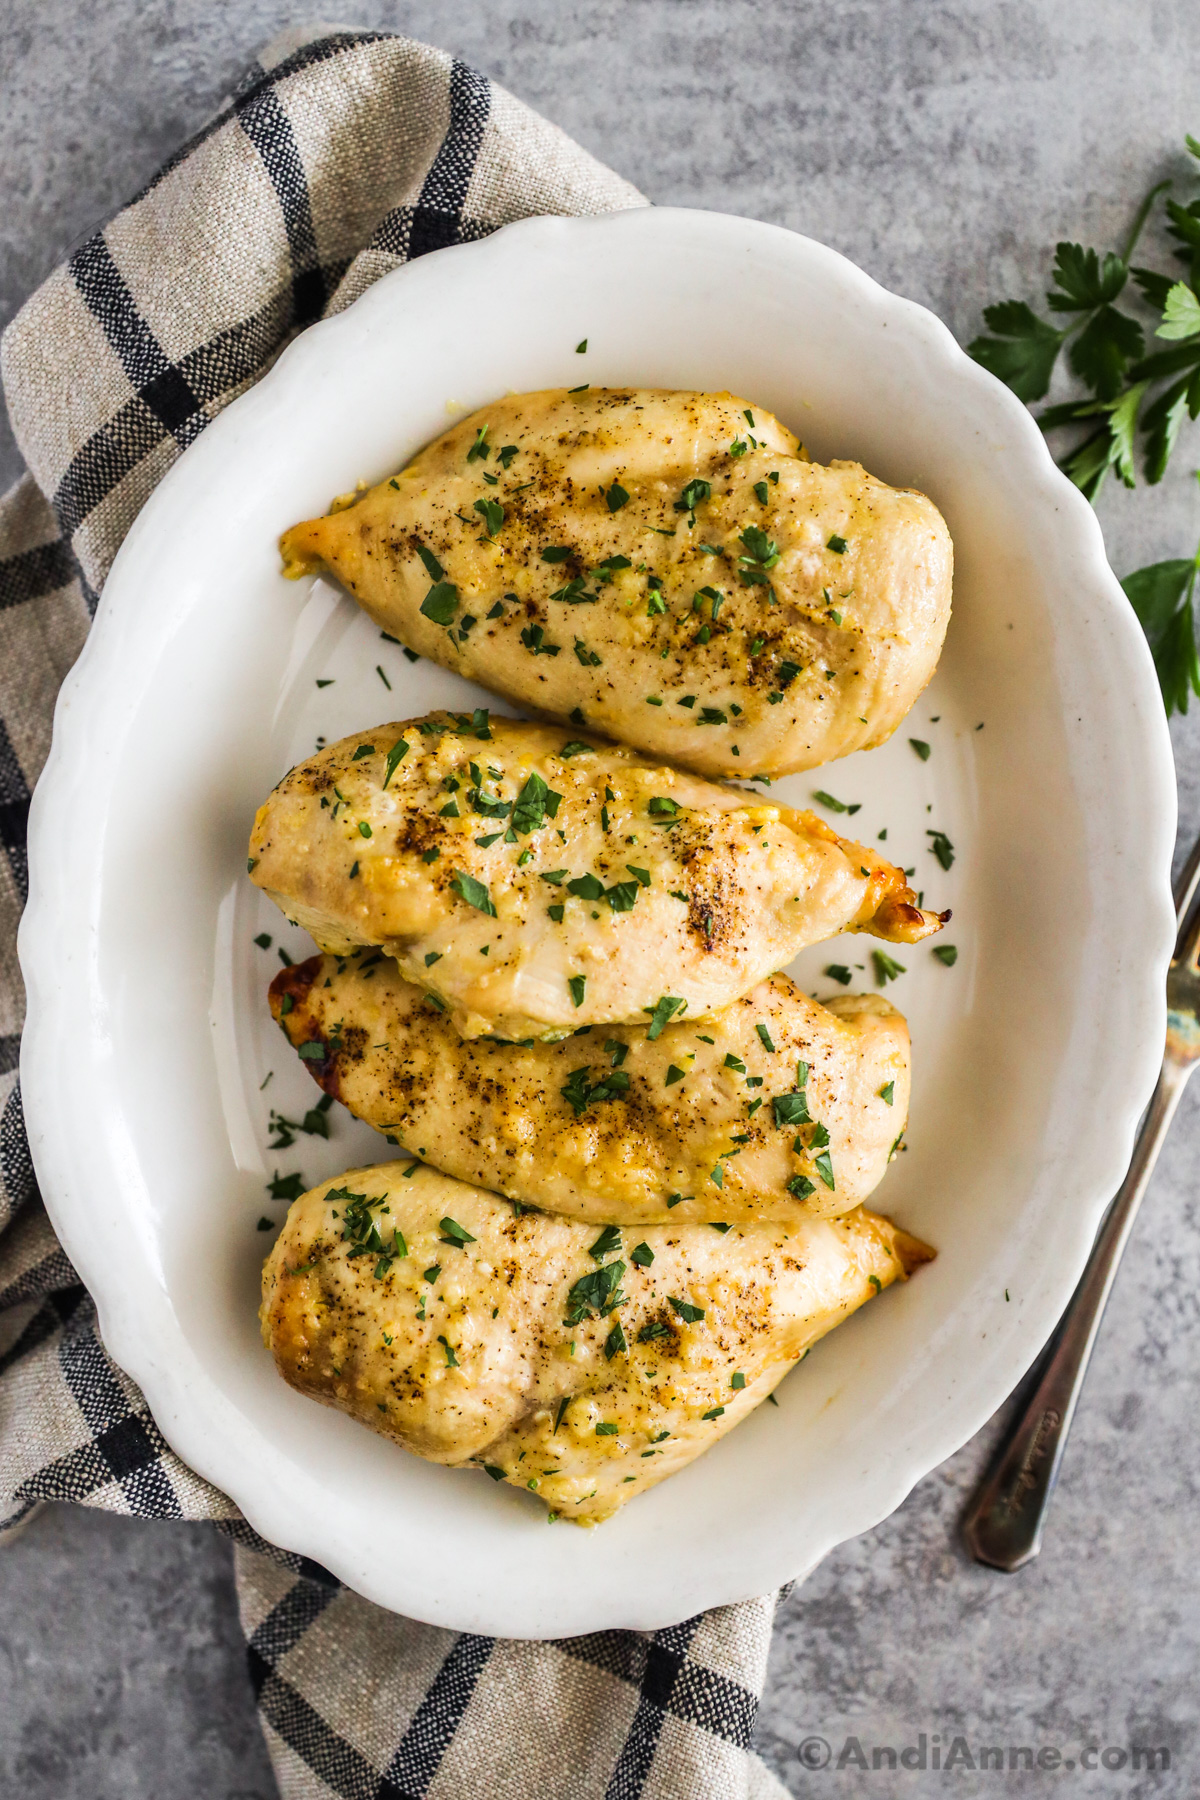 Baked honey mustard chicken breasts topped with parsley garnish.